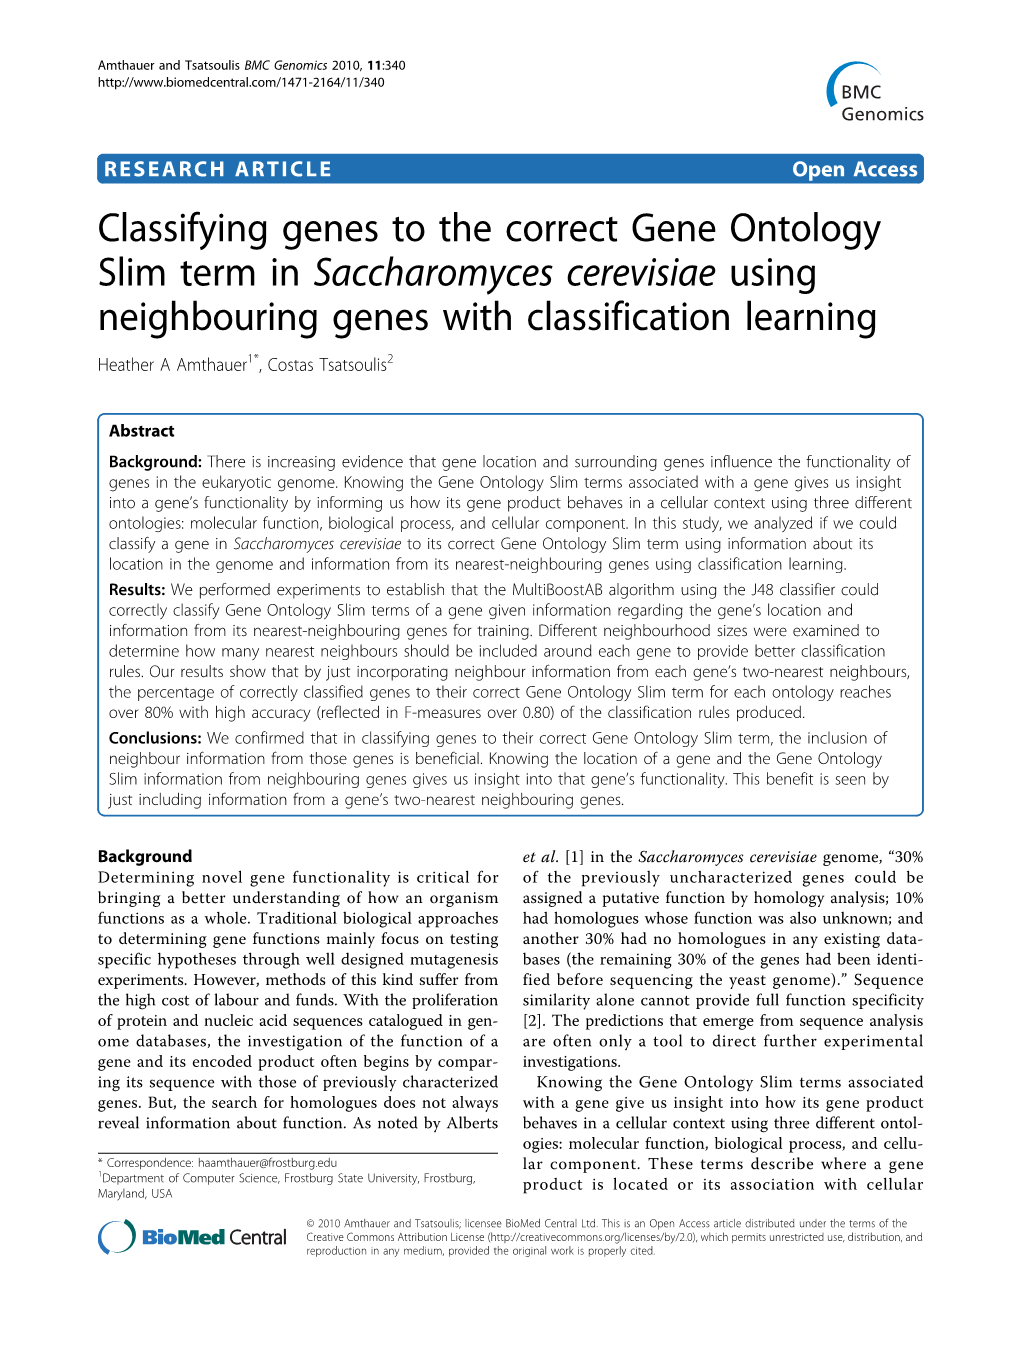 Classifying Genes to the Correct Gene Ontology Slim Term In